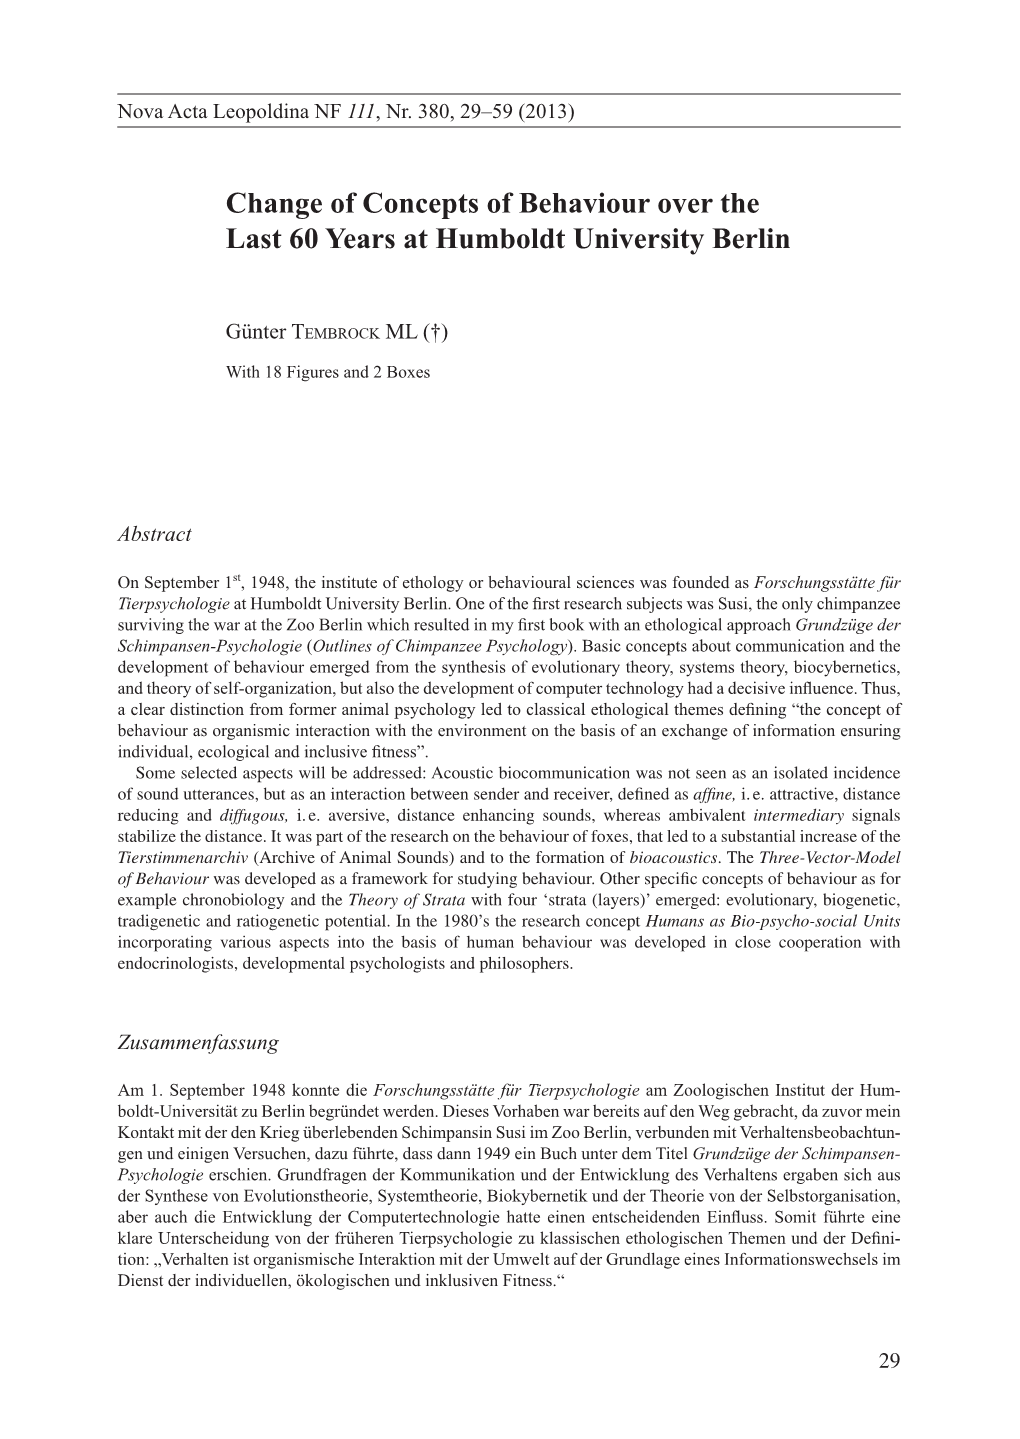 Change of Concepts of Behaviour Over the Last 60 Years at Humboldt University Berlin